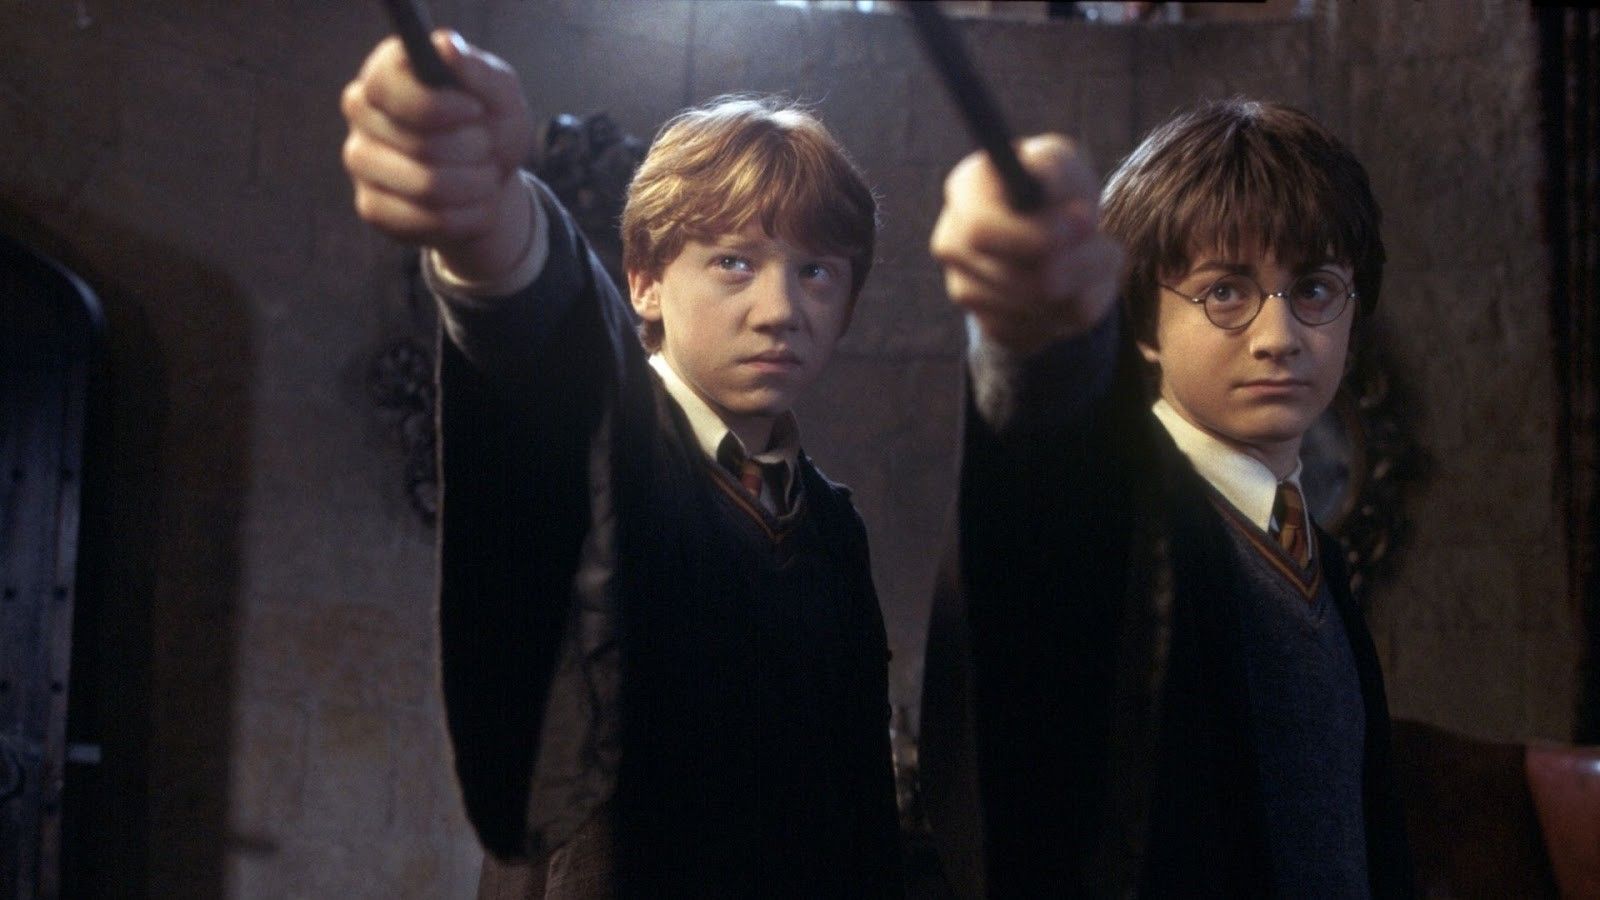 From 'Lumos' to 'Accio': Harry Potter spells that work on Android or iOS